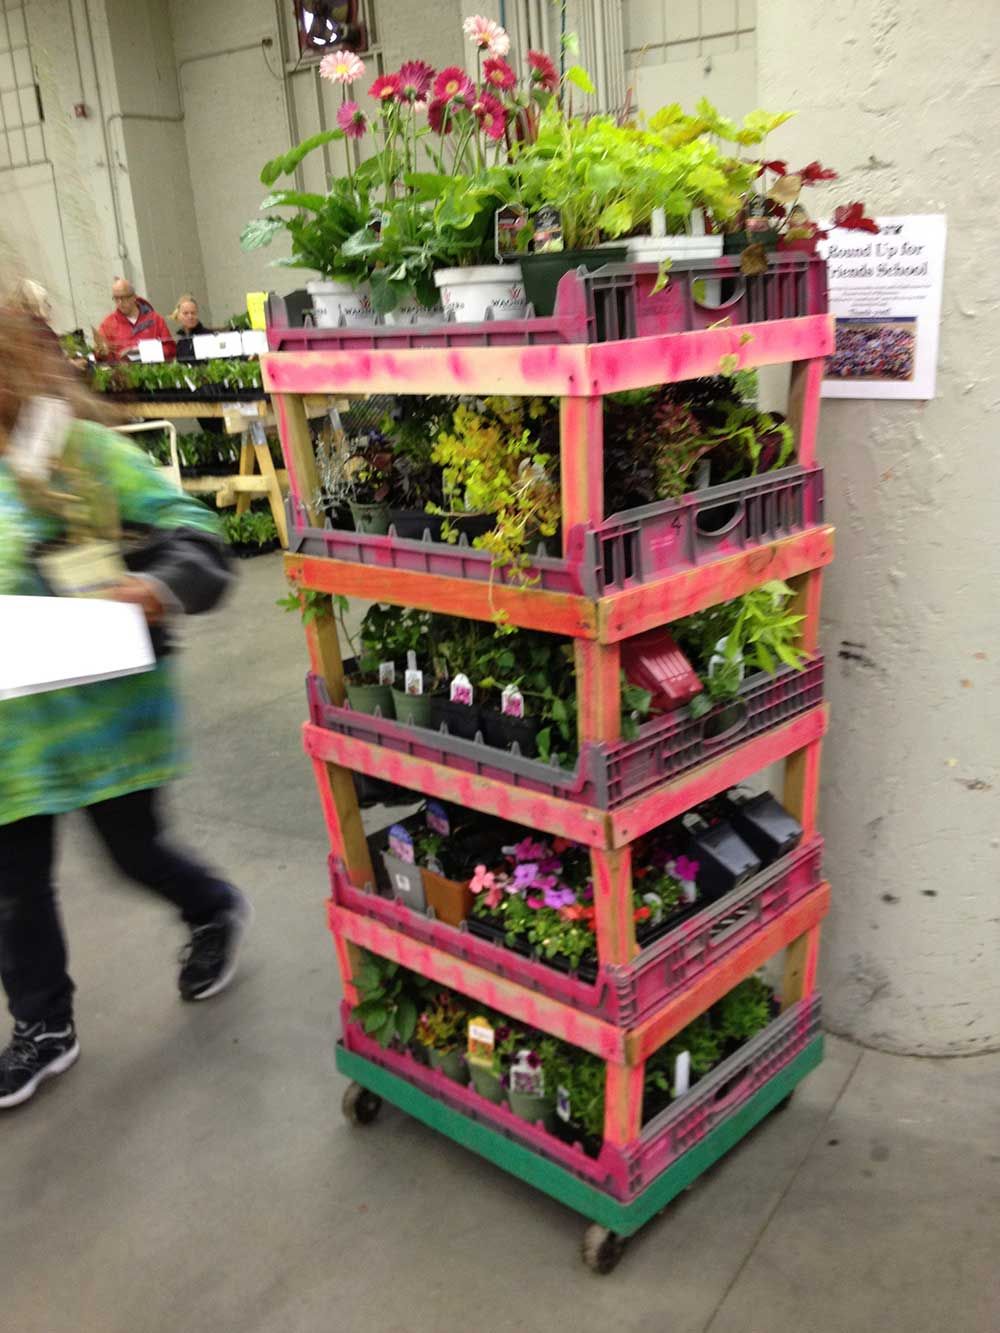 Fluorescent pink vertical shelves with wheels, full of plants